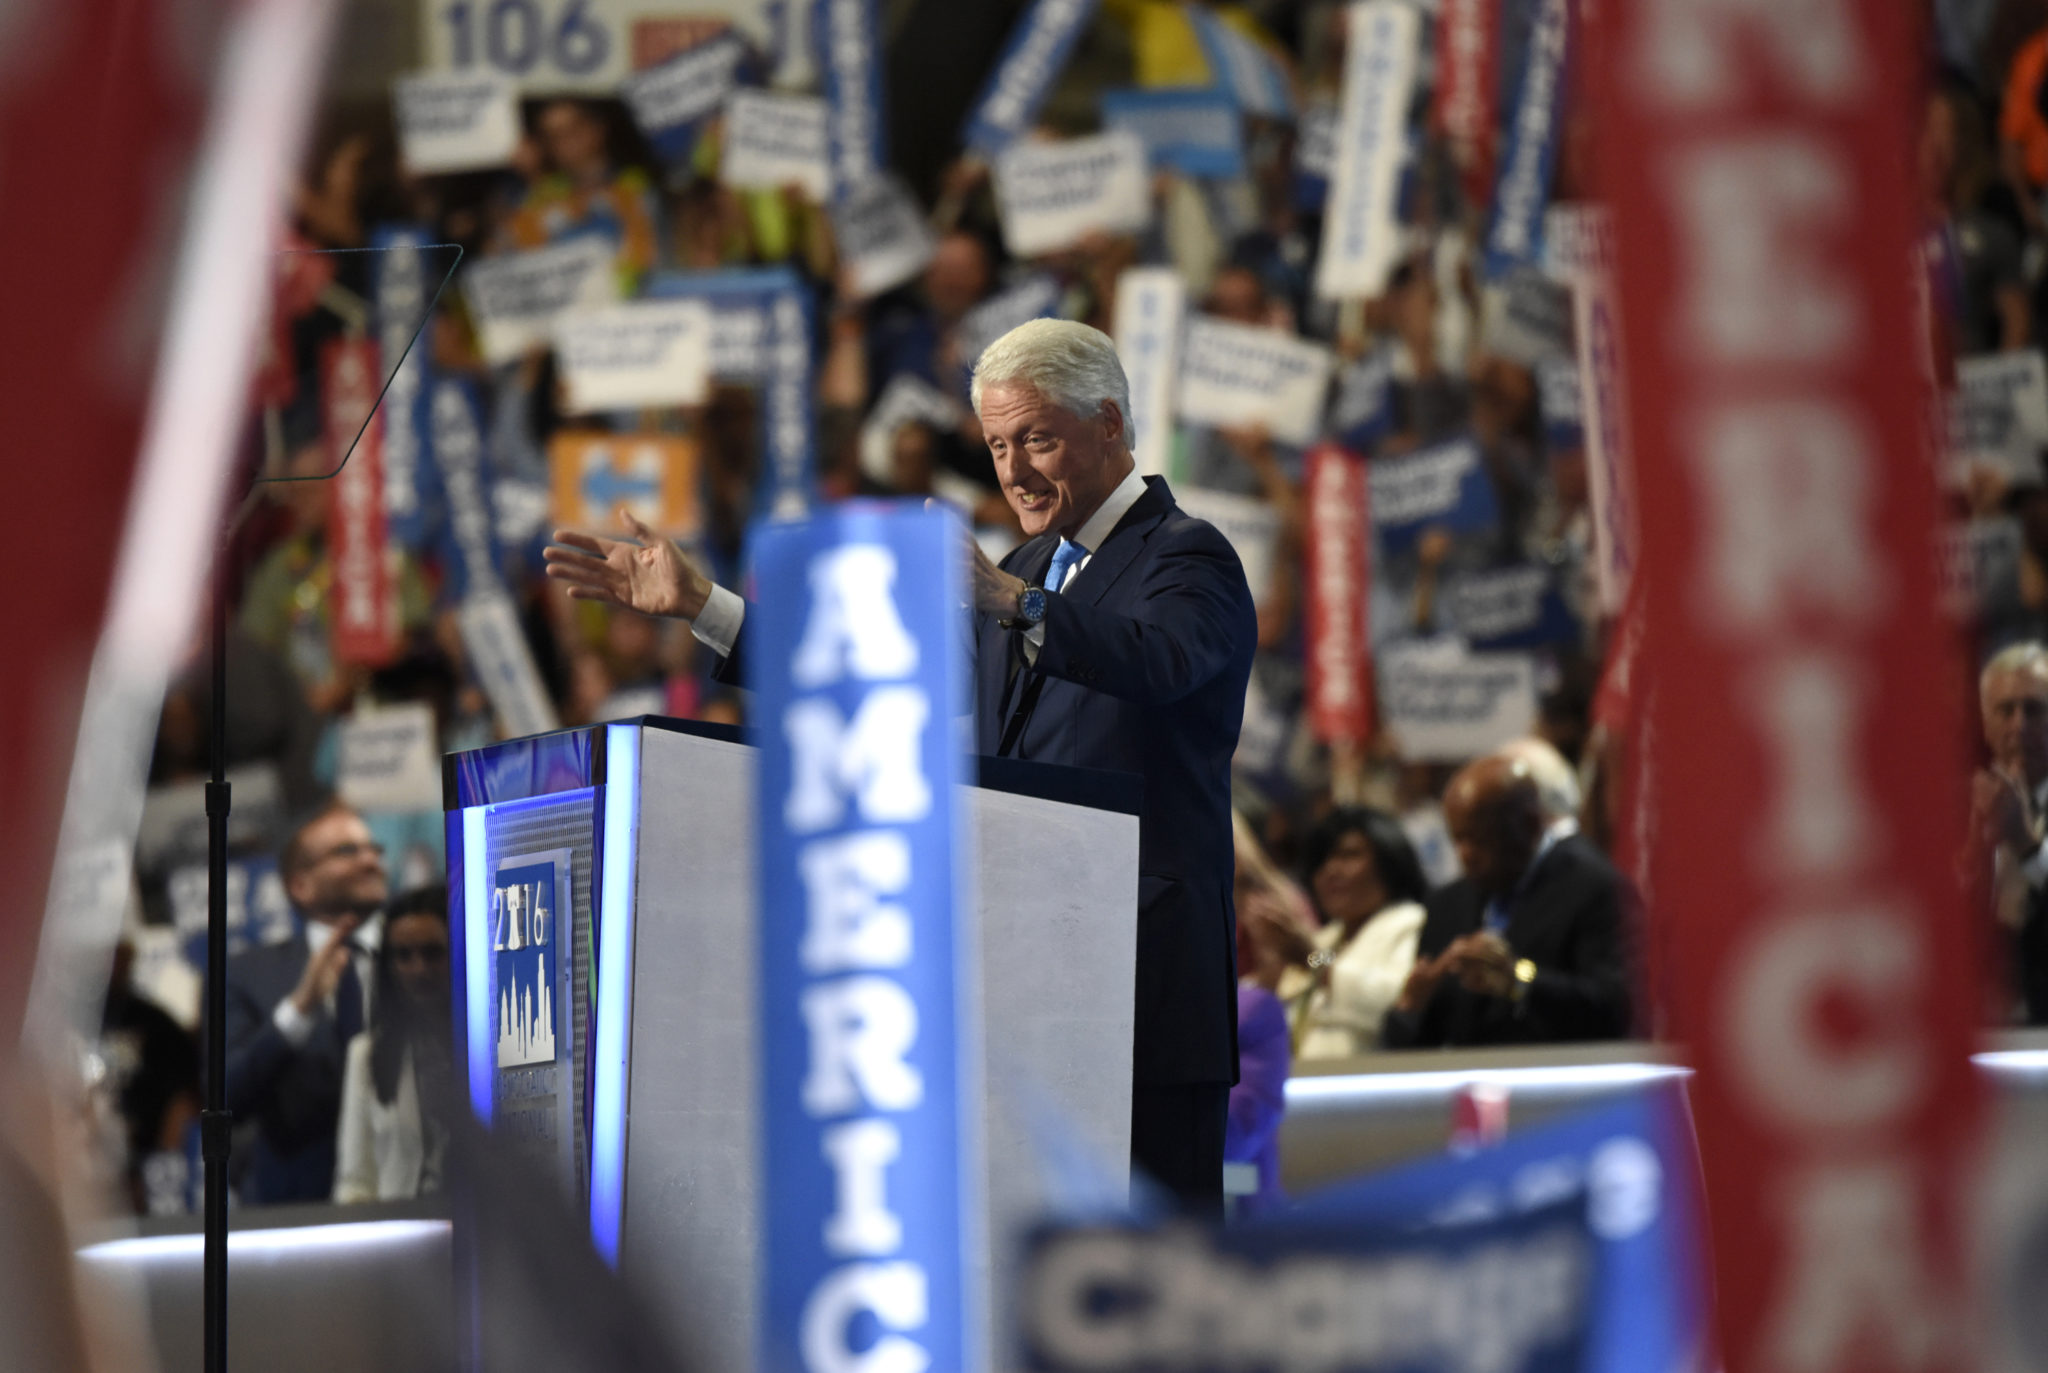 Bill Clinton speaks at the 2016 Democratic National Convention in Philadelphia, deconstructing and reconstructing Hillary Clinton's public biography.